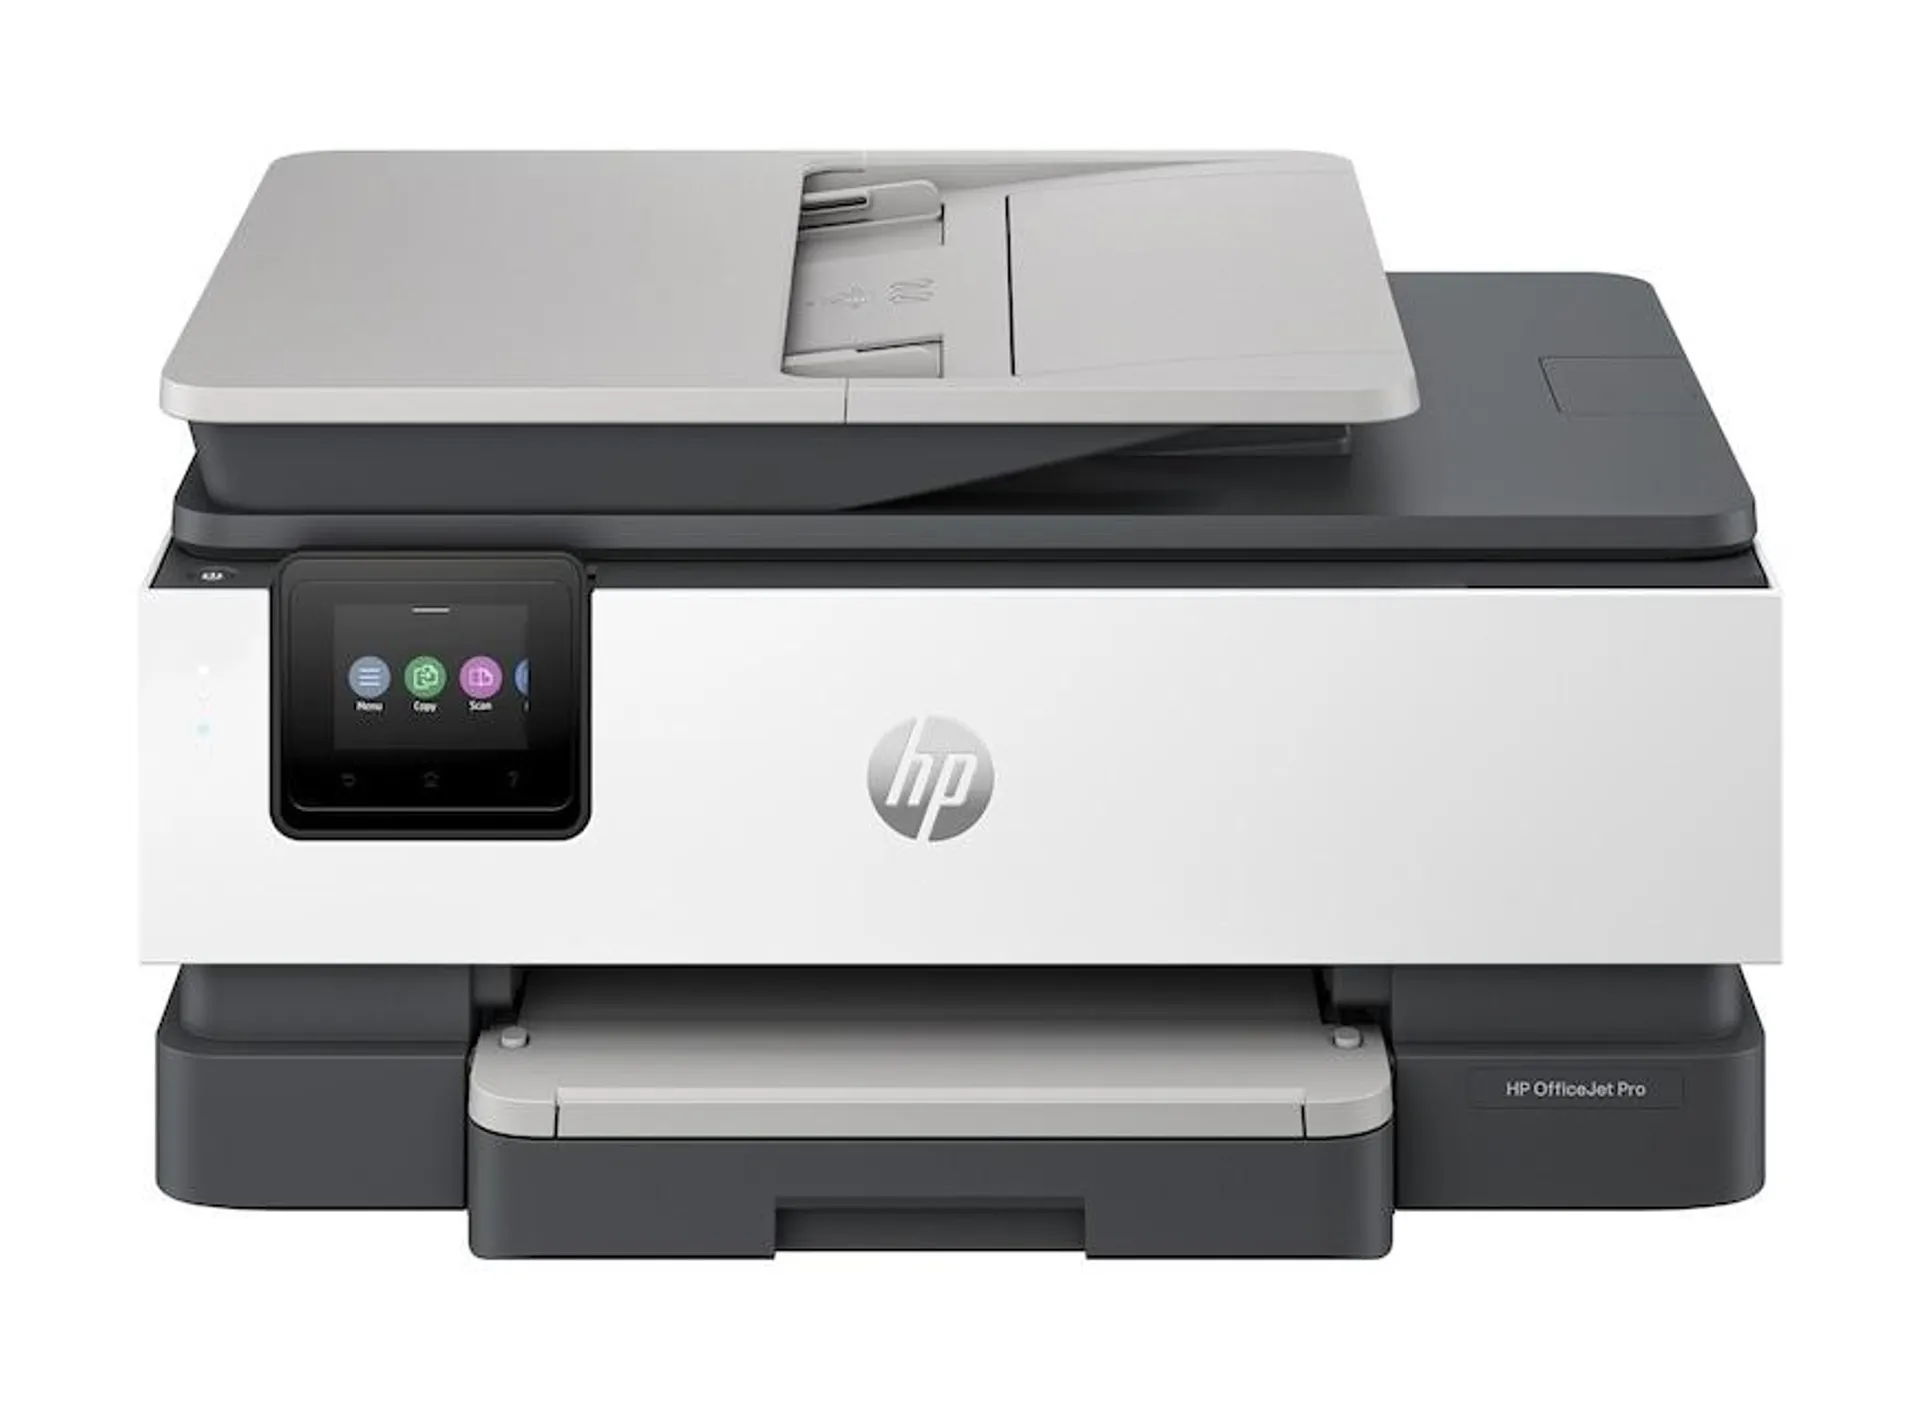 HP OfficeJet Pro 8132e Wireless All-in-One Printer with Fax and 3 months Instant Ink